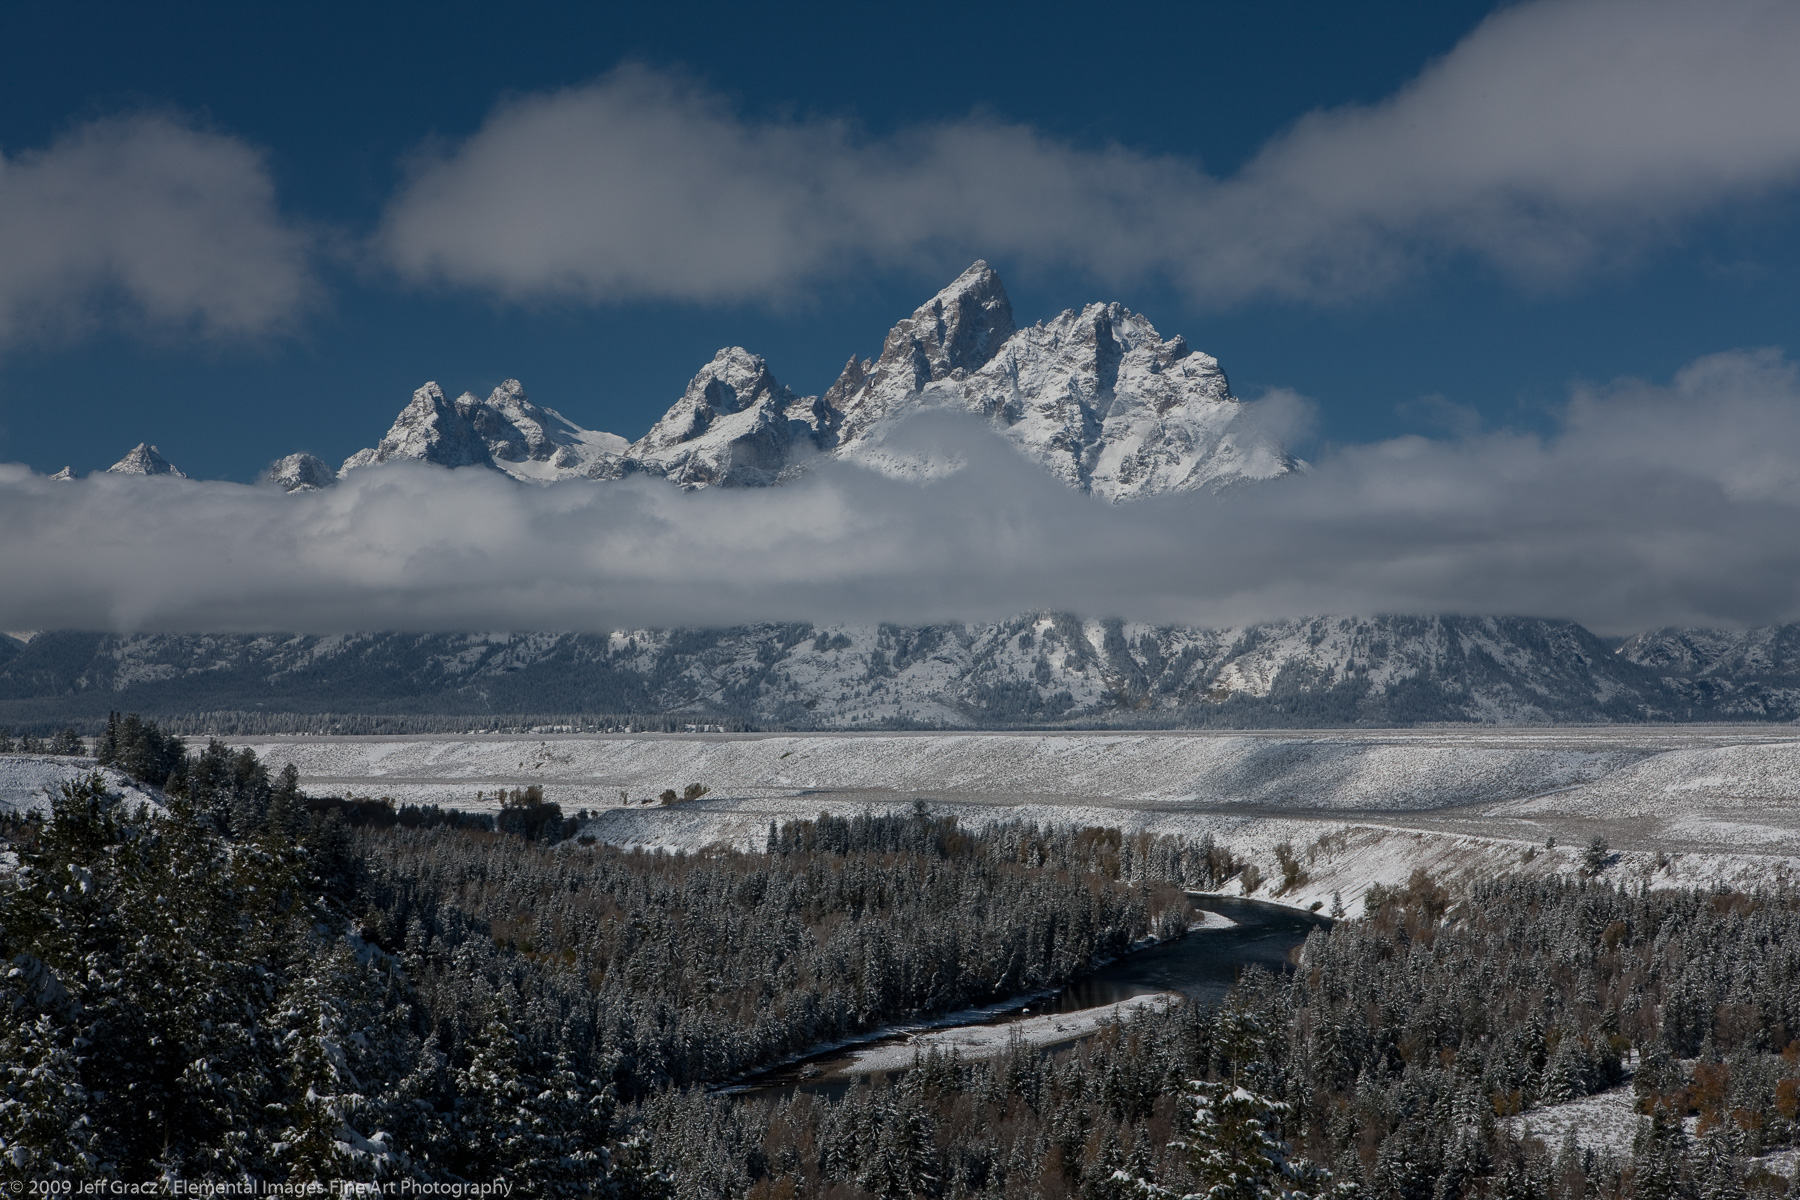 Grand Tetons in early winter | Grand Teton National Park | WY | USA - © © 2009 Jeff Gracz / Elemental Images Fine Art Photography - All Rights Reserved Worldwide